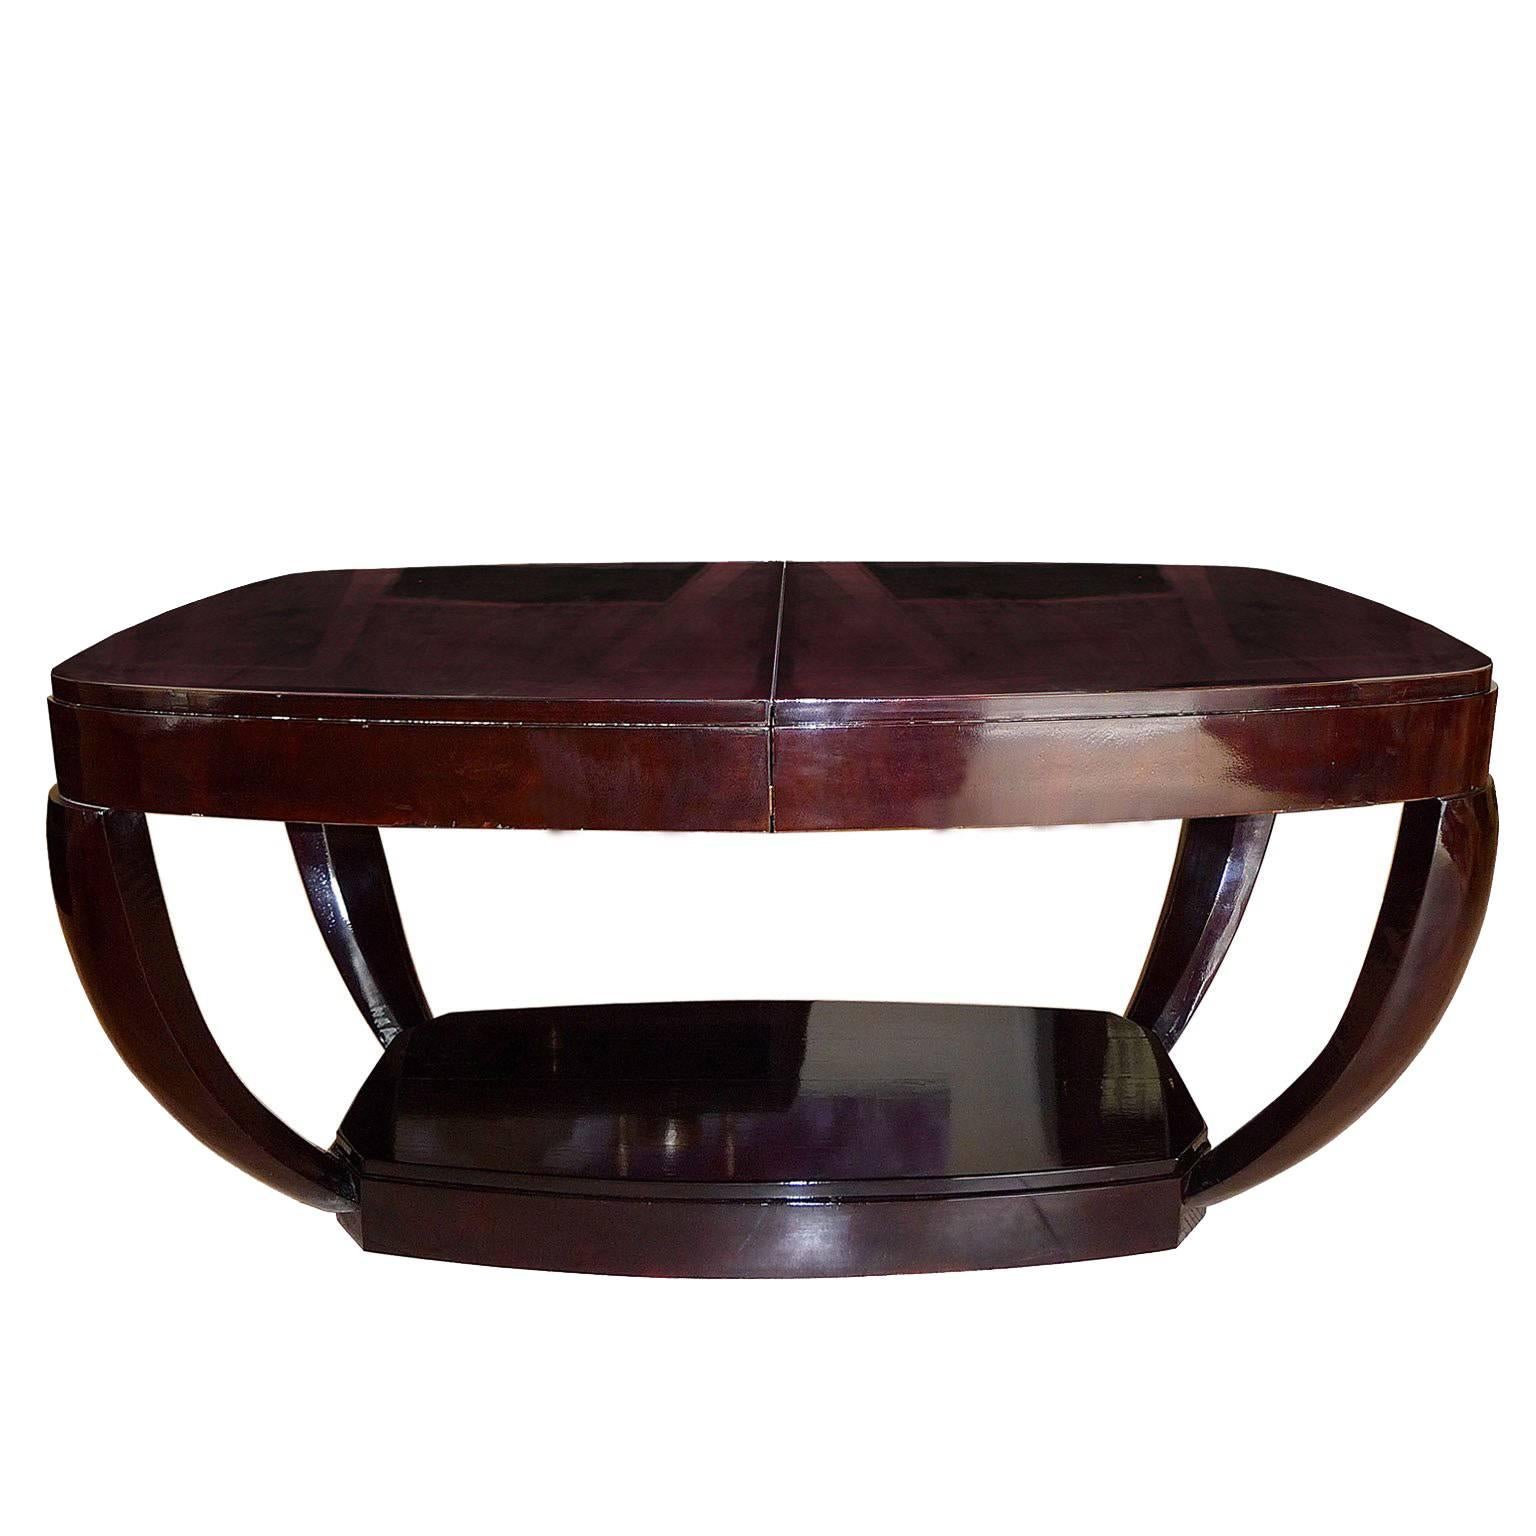 Lacquered Unique Art Deco Extendable Table by Hubert Martin and Ploquin and Six Chairs For Sale